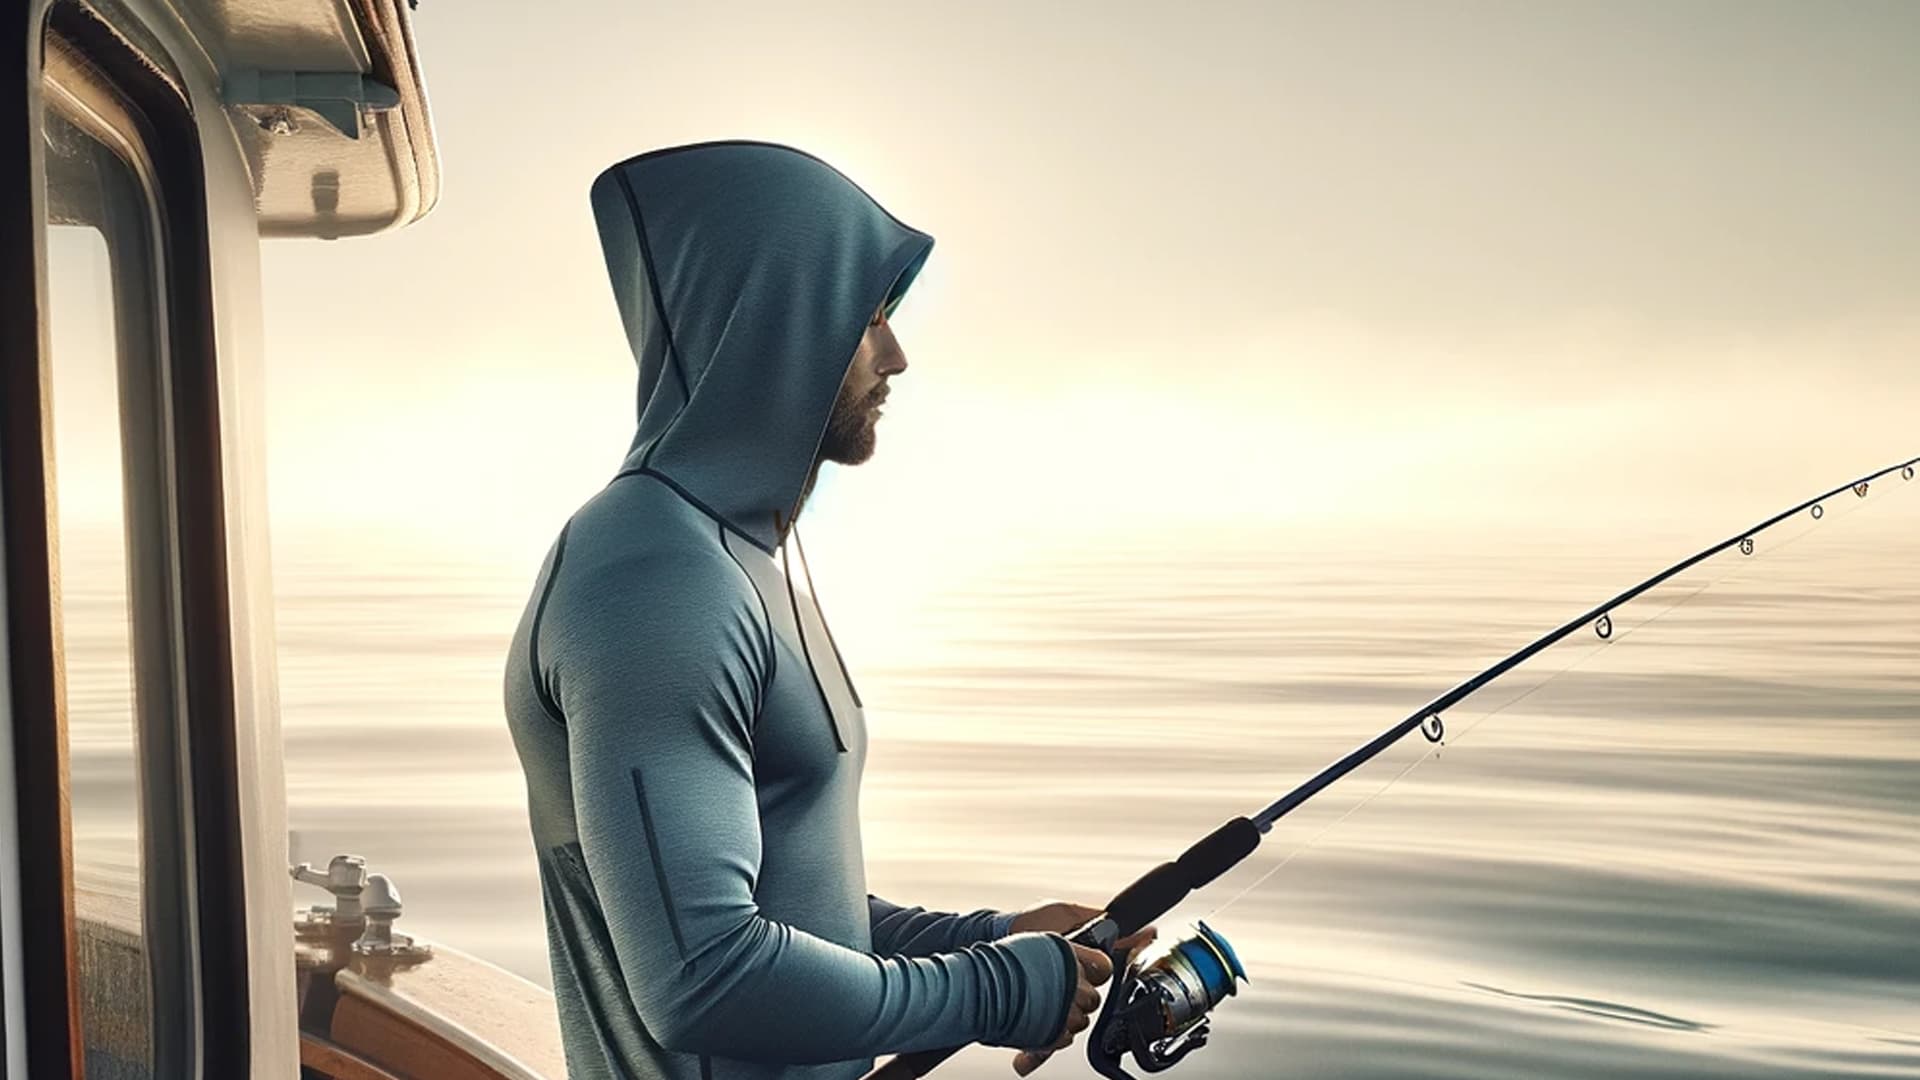 Angler Approved: Best Hooded Fishing Shirt